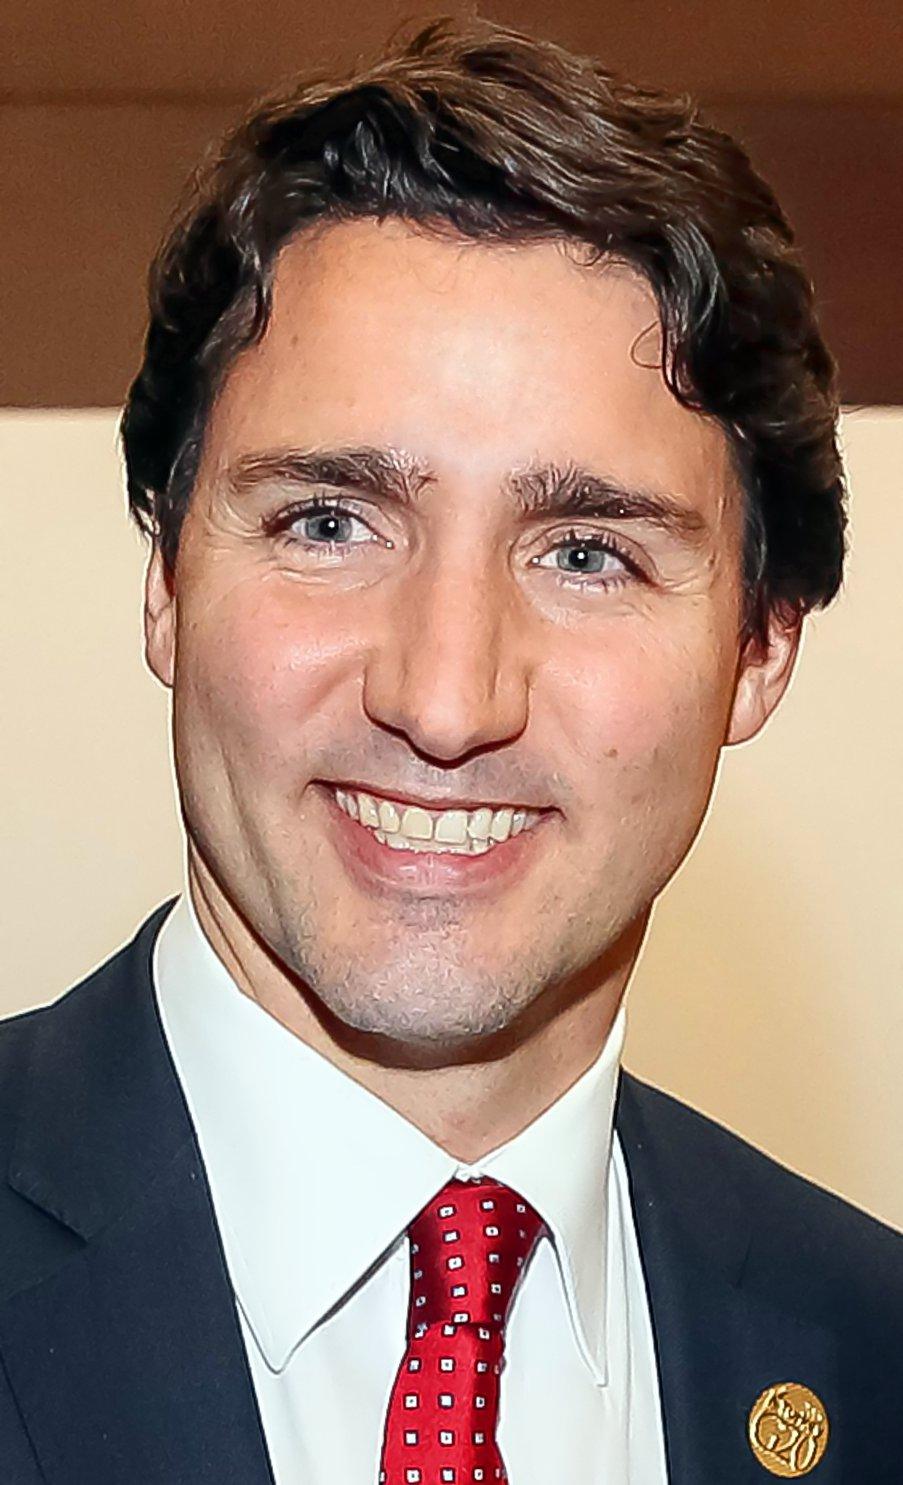 canada-s-pm-trudeau-goes-to-washington-new-focus-on-climate-changes